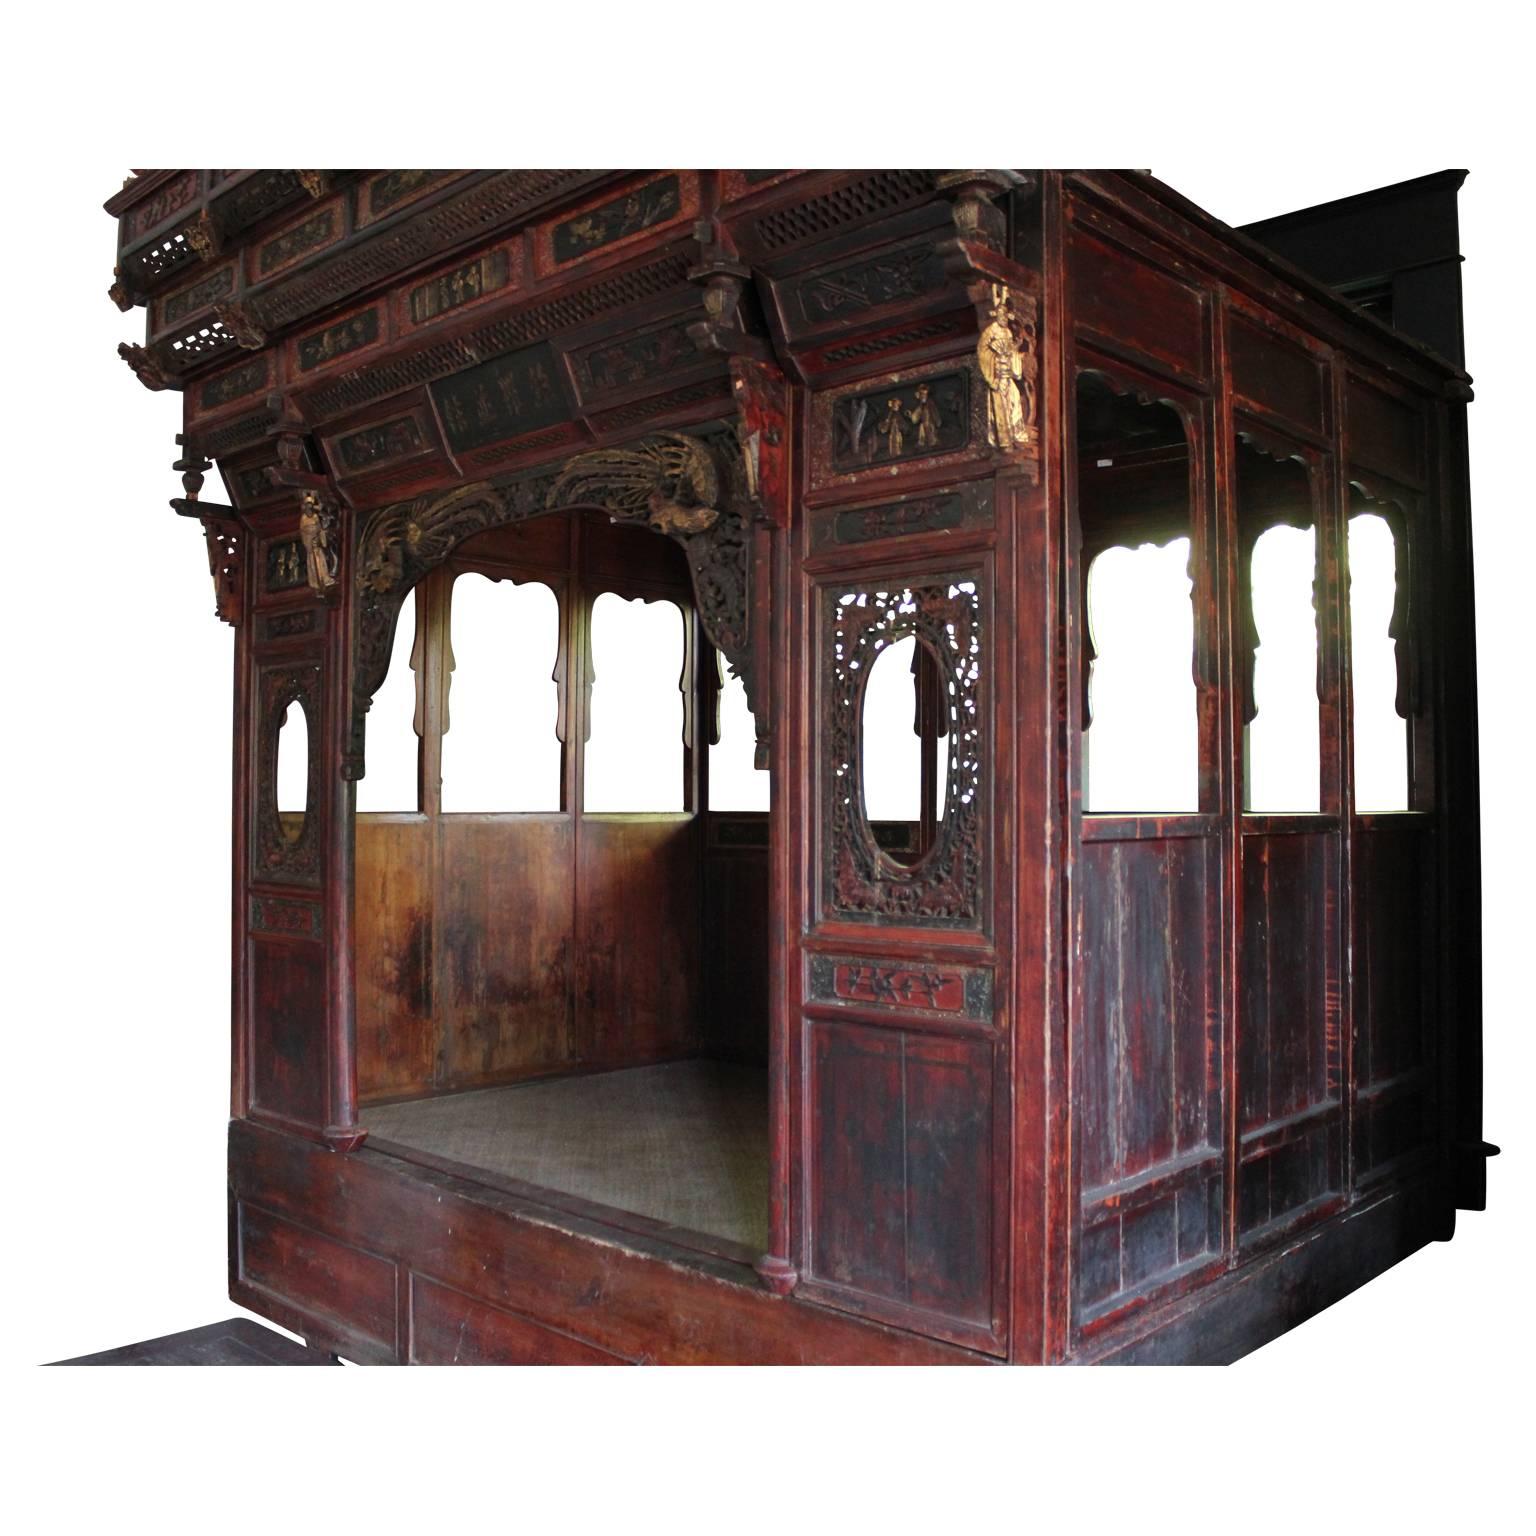 Gorgeous and monumental traditional Chinese wedding bed with platform. The wedding bed is constructed by a set of grooves, so no screws and nails are required. Displays expert traditional Chinese hand-carvings. 

Depth measurement of the bed